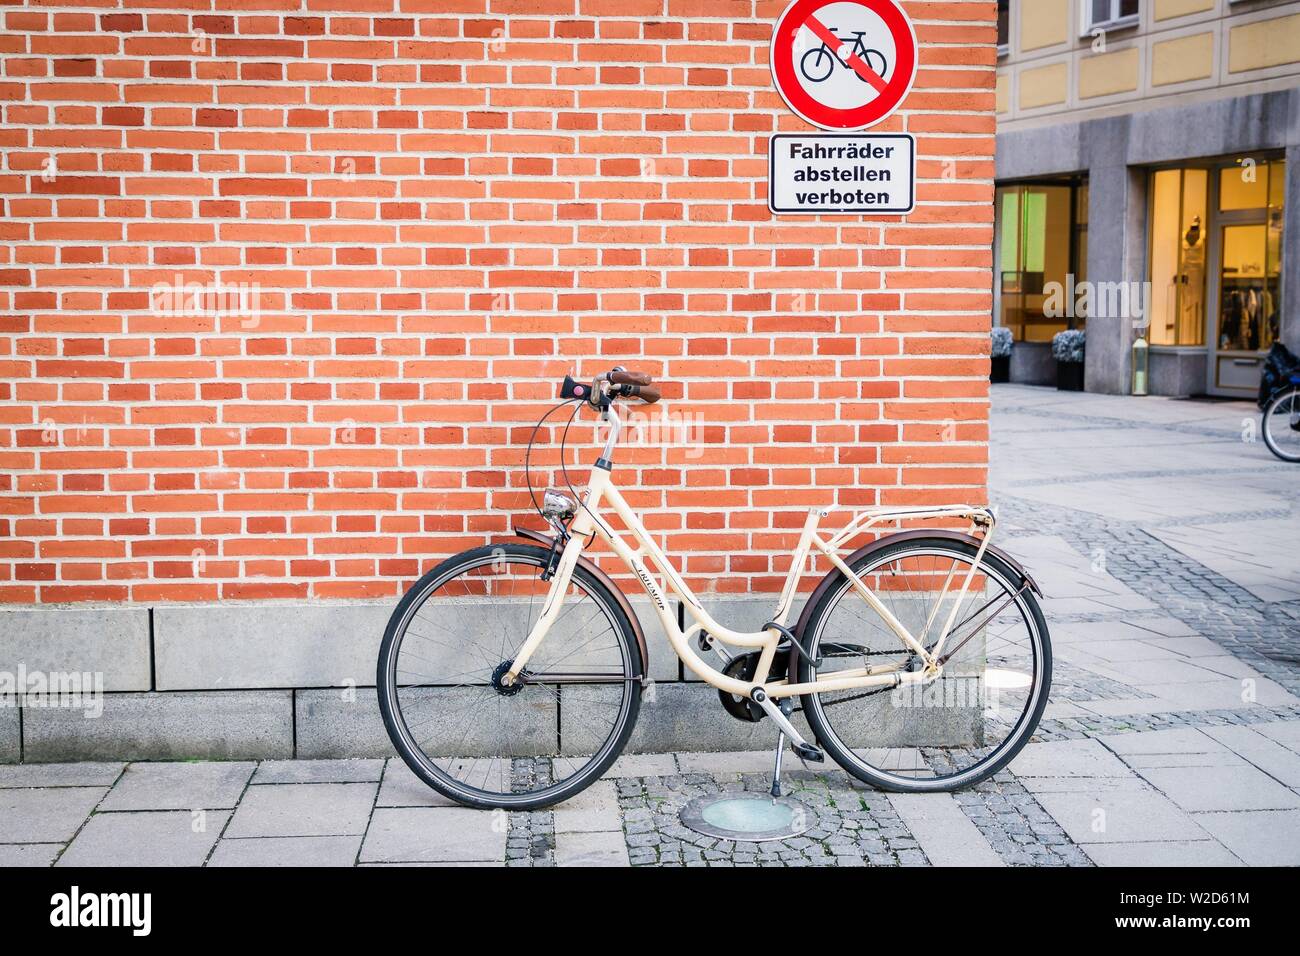 Munich, Germany. February 17, 2019. Bicycle on the brick wall background. Inscription in german prohibition sign no parking bicycle. Disobey concept Stock Photo